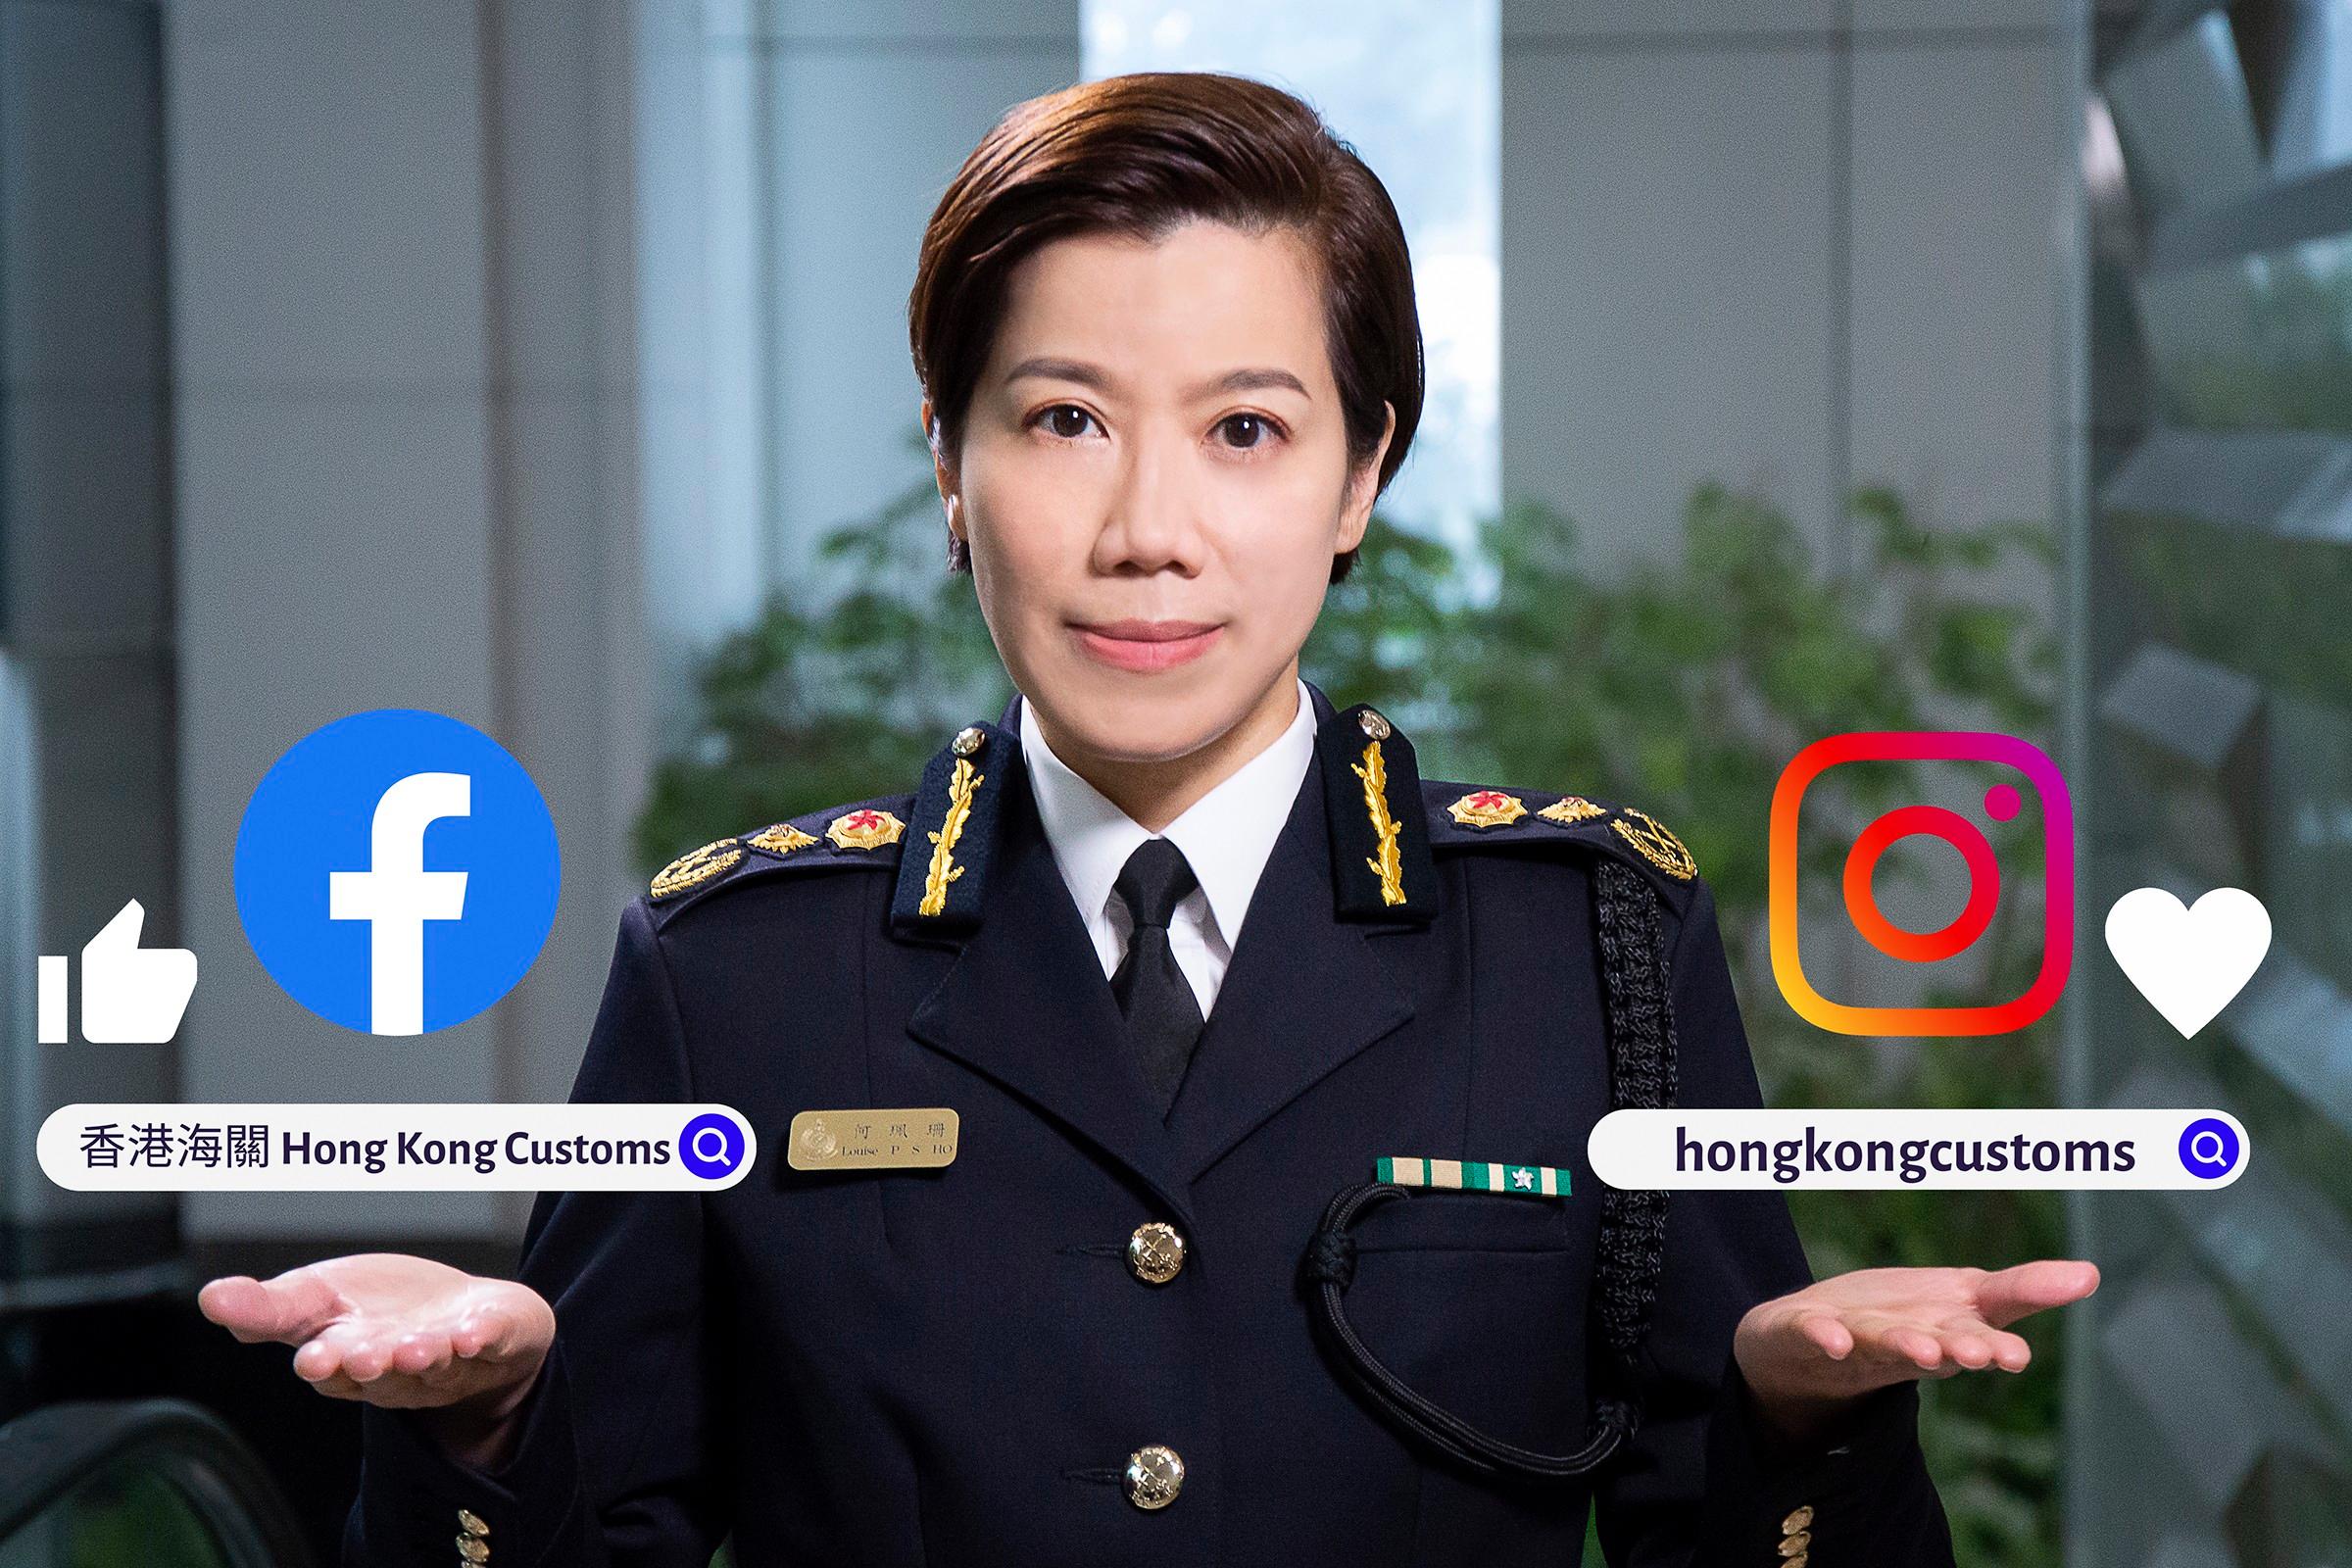 Hong Kong Customs today (February 22) launched a new social media channel to strengthen communication and connection with different sectors of the community through its Facebook page and Instagram account. A promotional video featuring the Commissioner of Customs and Excise, Ms Louise Ho, has been produced specifically for serving as a prelude to the launch. Photo shows a screenshot of the video.